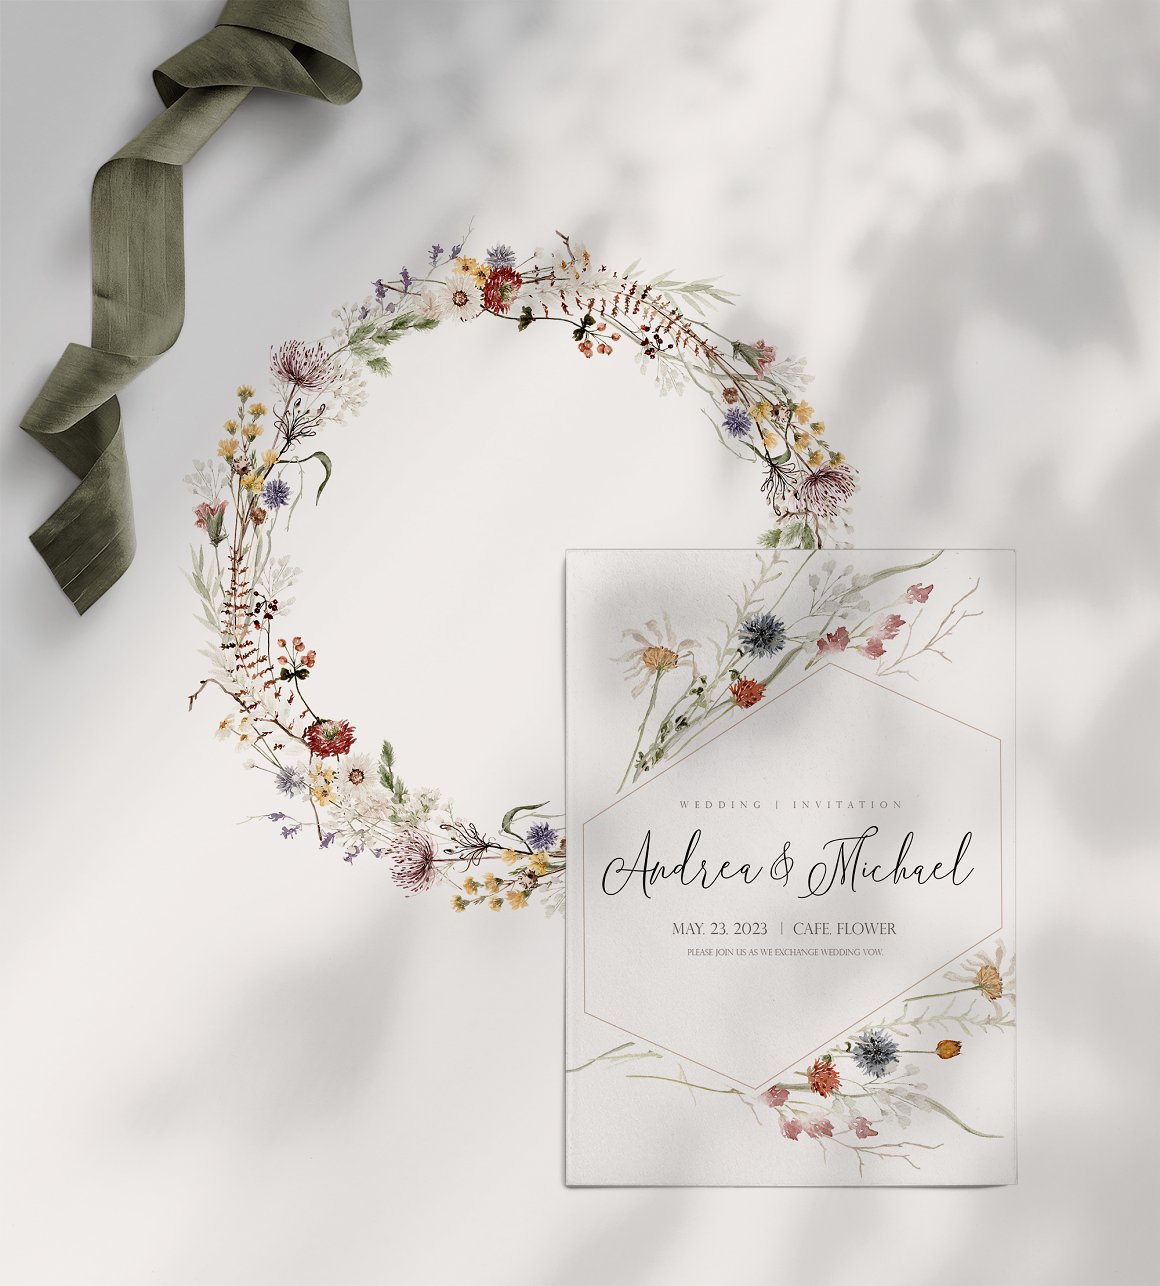 Floral wreath and white boho wedding card on a gray background.